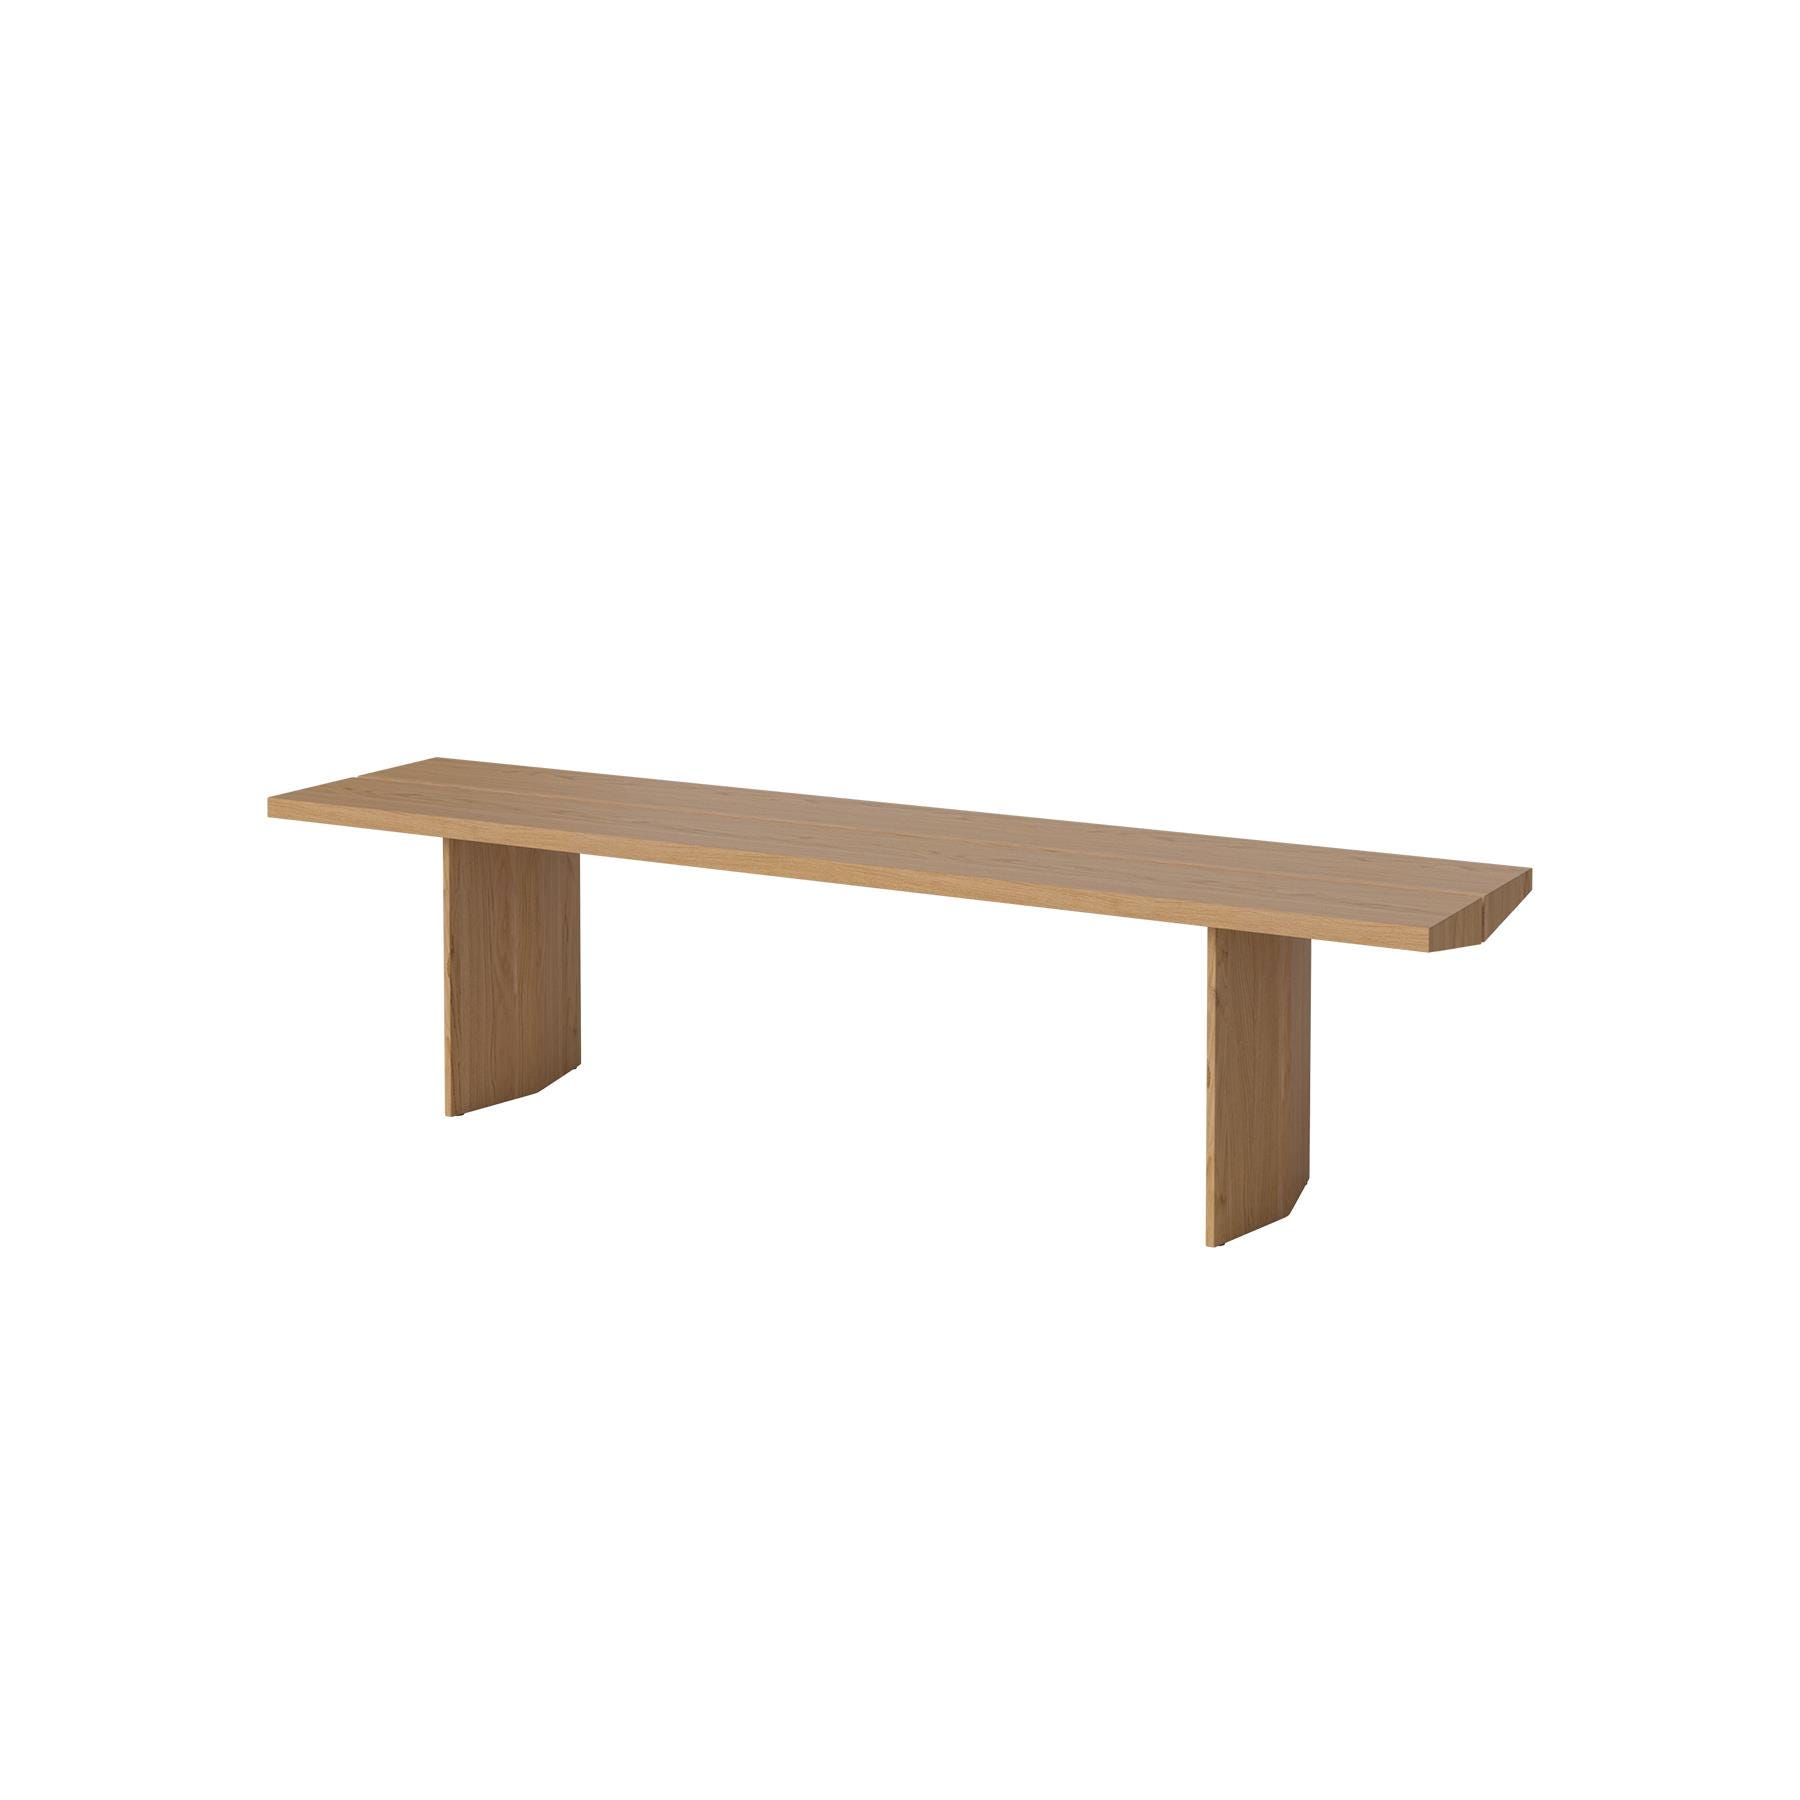 Bolia Alp Dining Bench Oiled Oak Lenghth 180cm Light Wood Designer Furniture From Holloways Of Ludlow